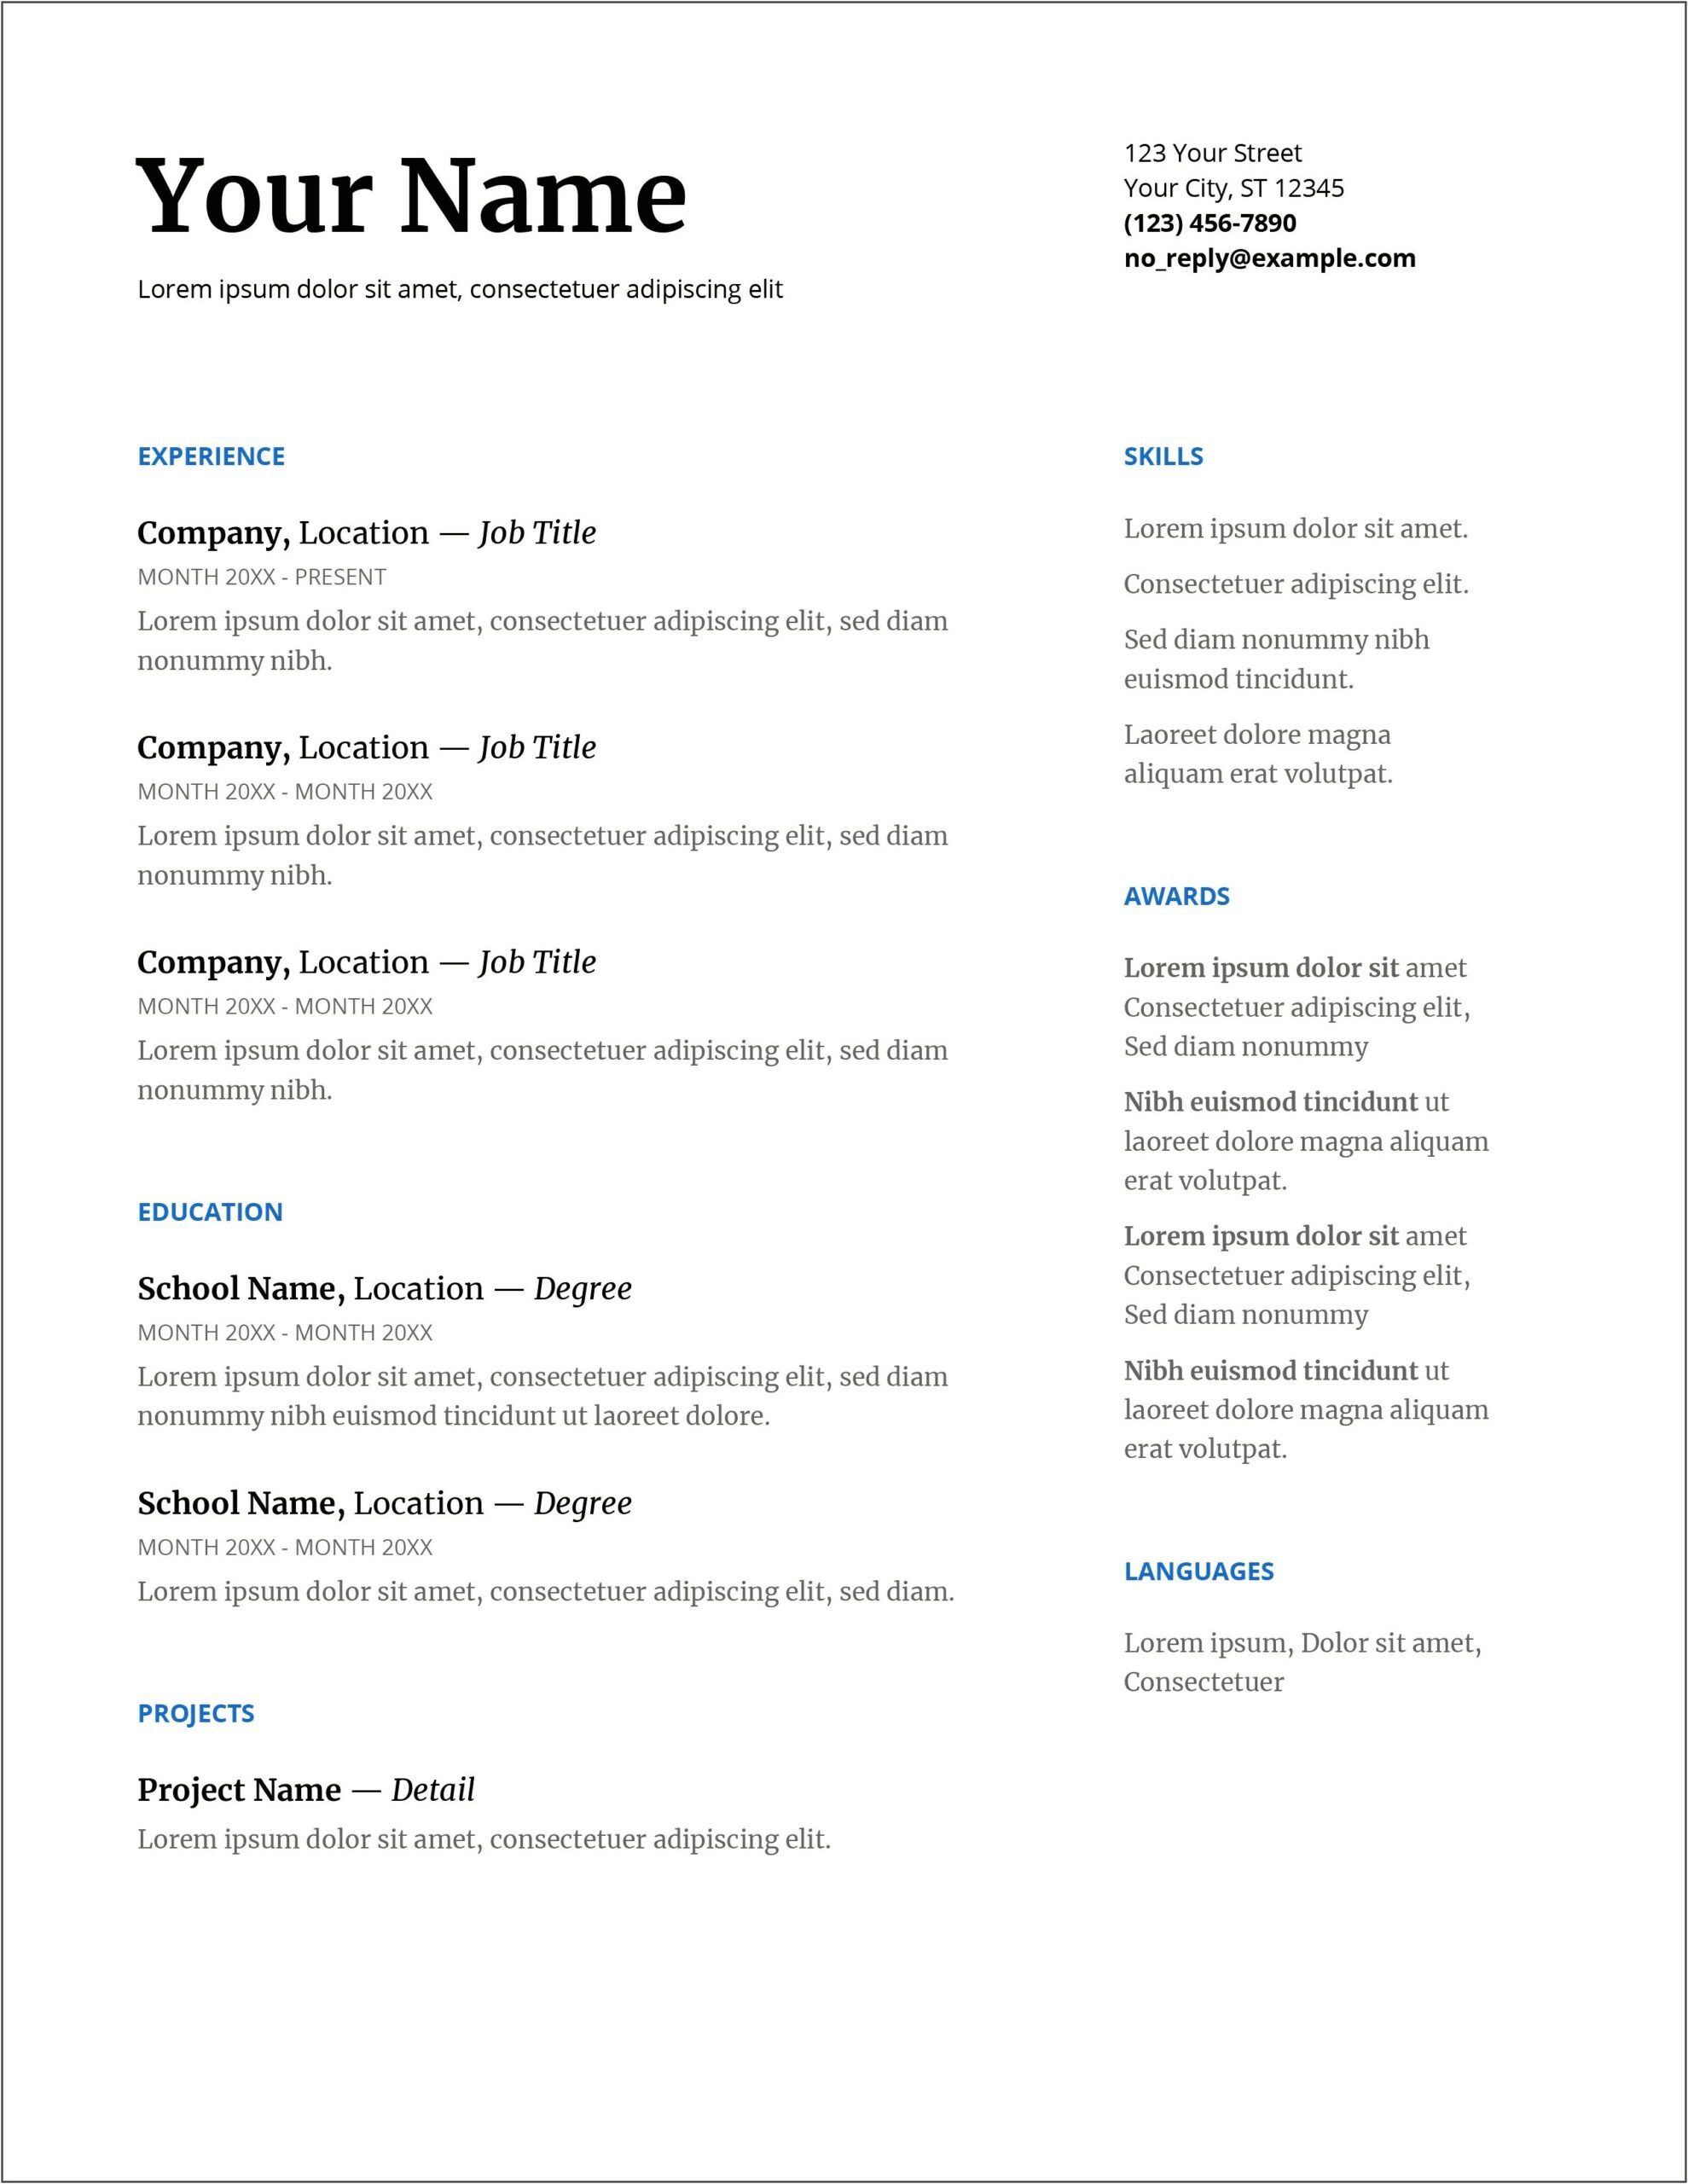 Resume Samples For Airport Job With No Experience